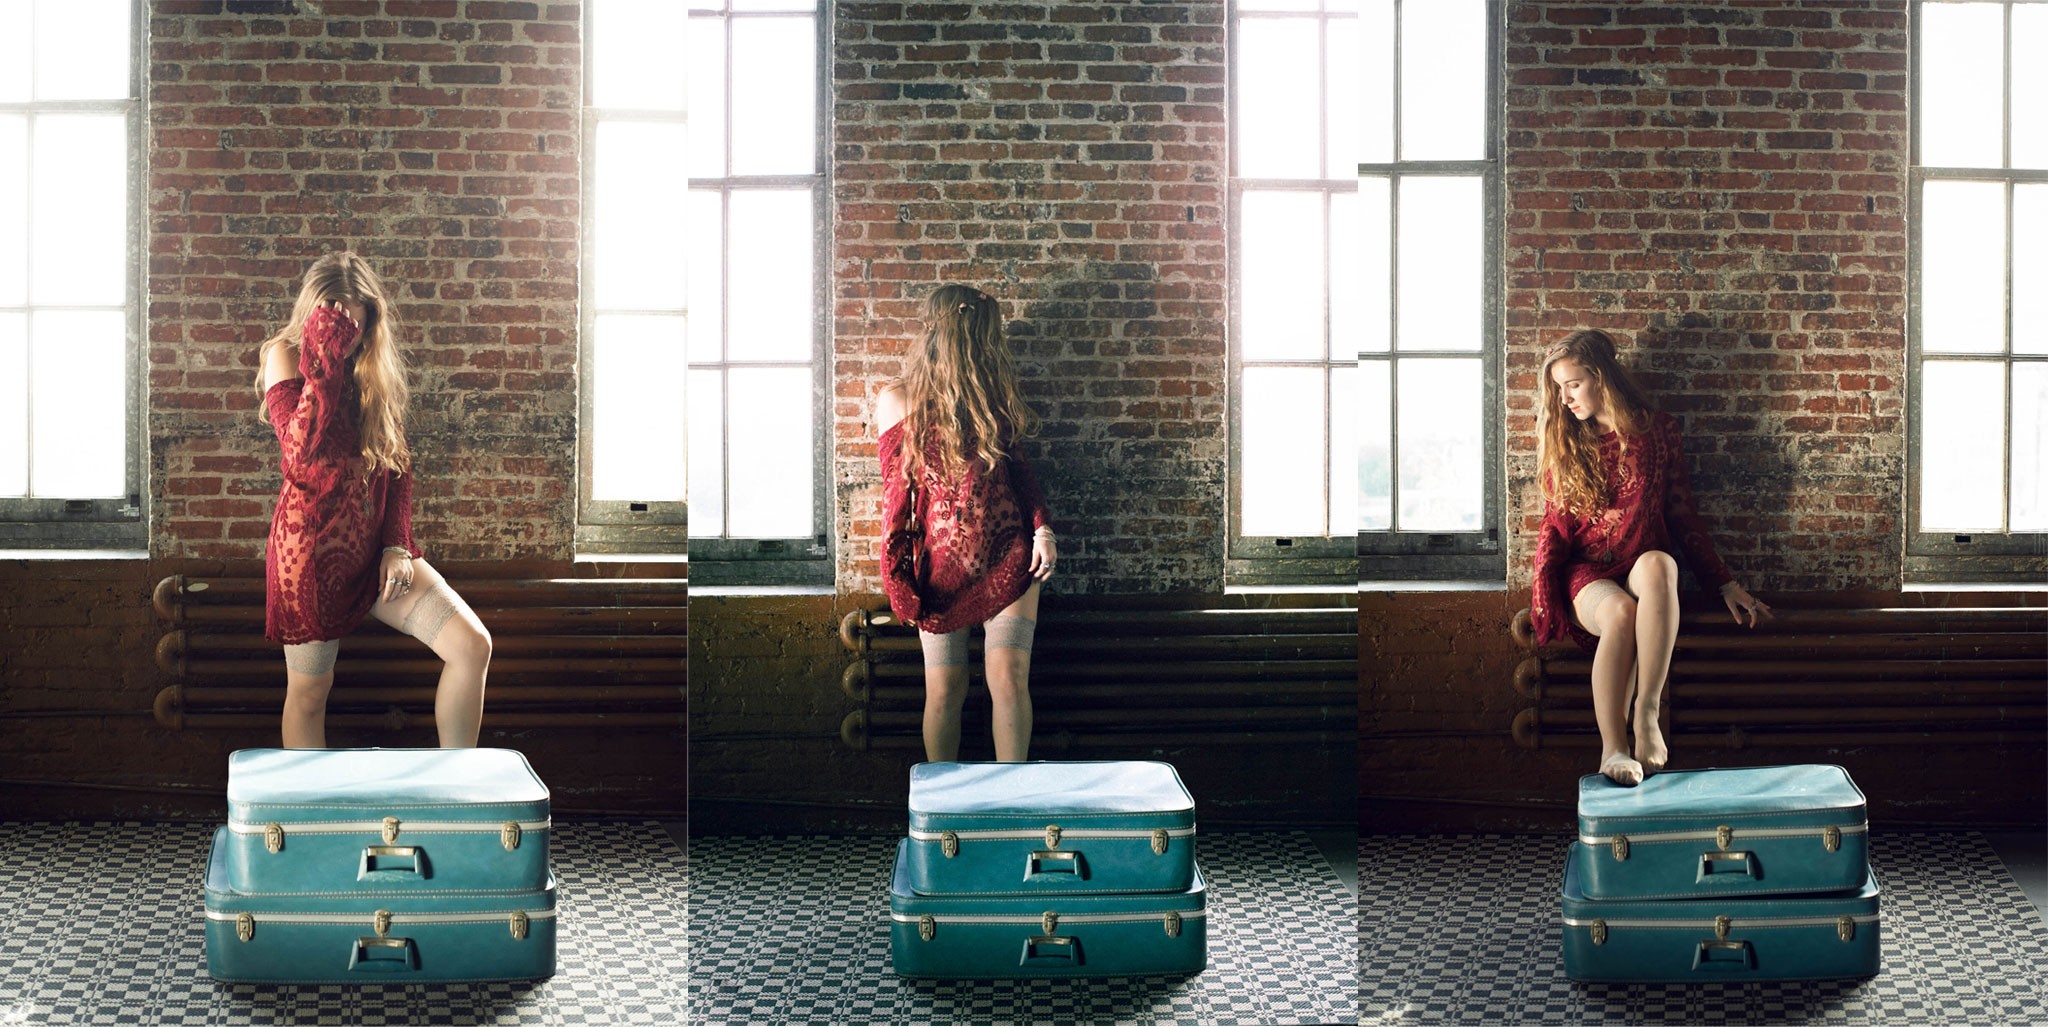 People 2048x1027 women model blonde long hair collage red dress suitcase luggage bricks window sitting stockings curly hair hair in face